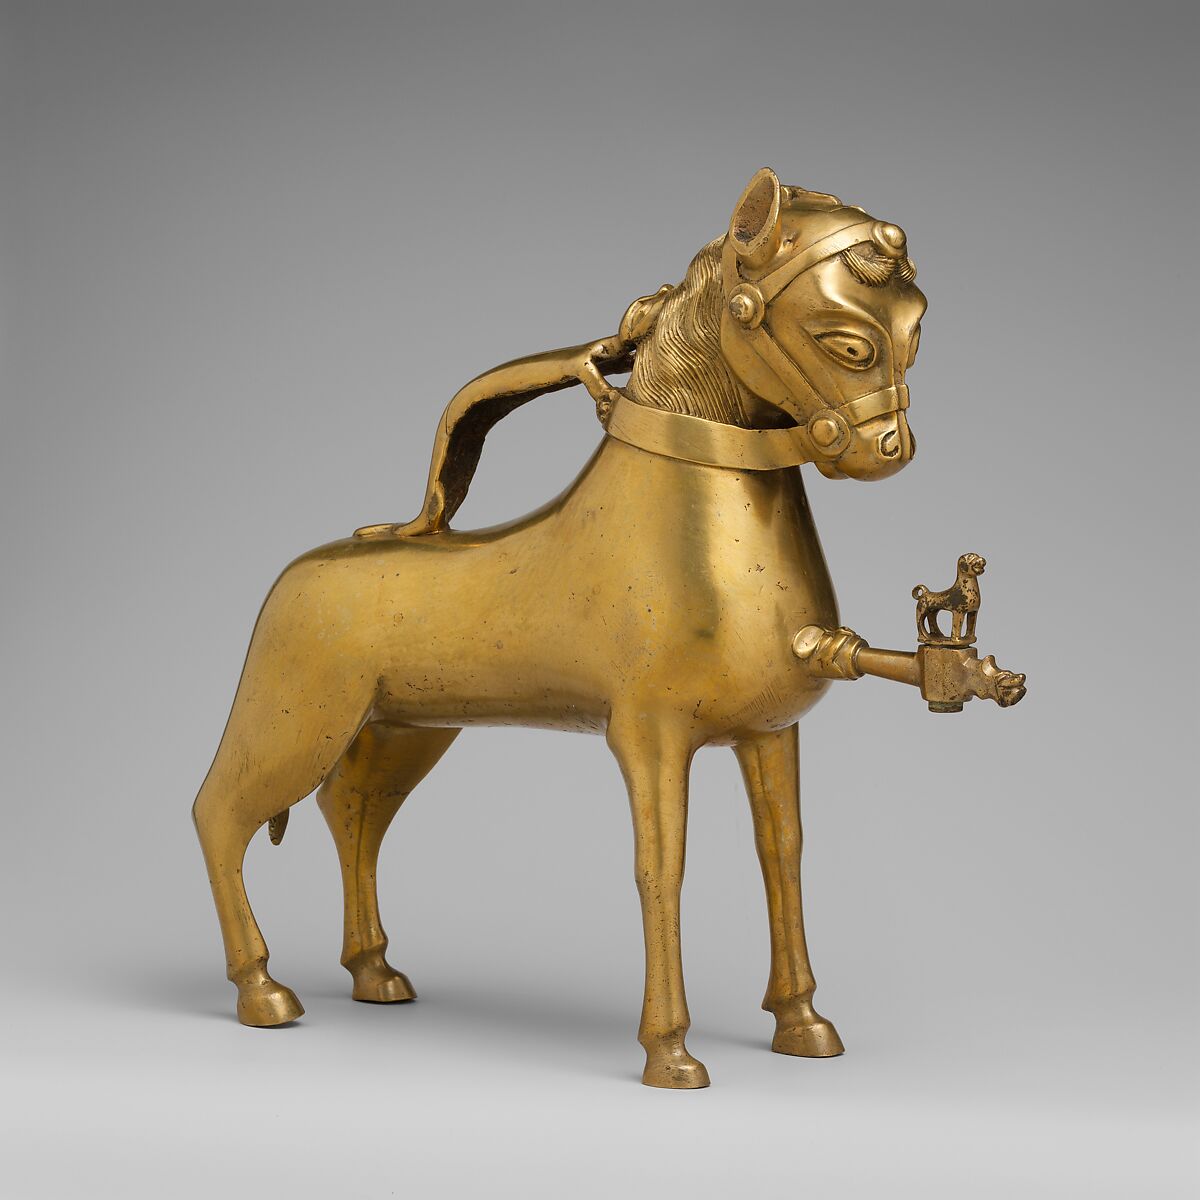 Aquamanile in the Form of a Horse, Copper alloy, German 